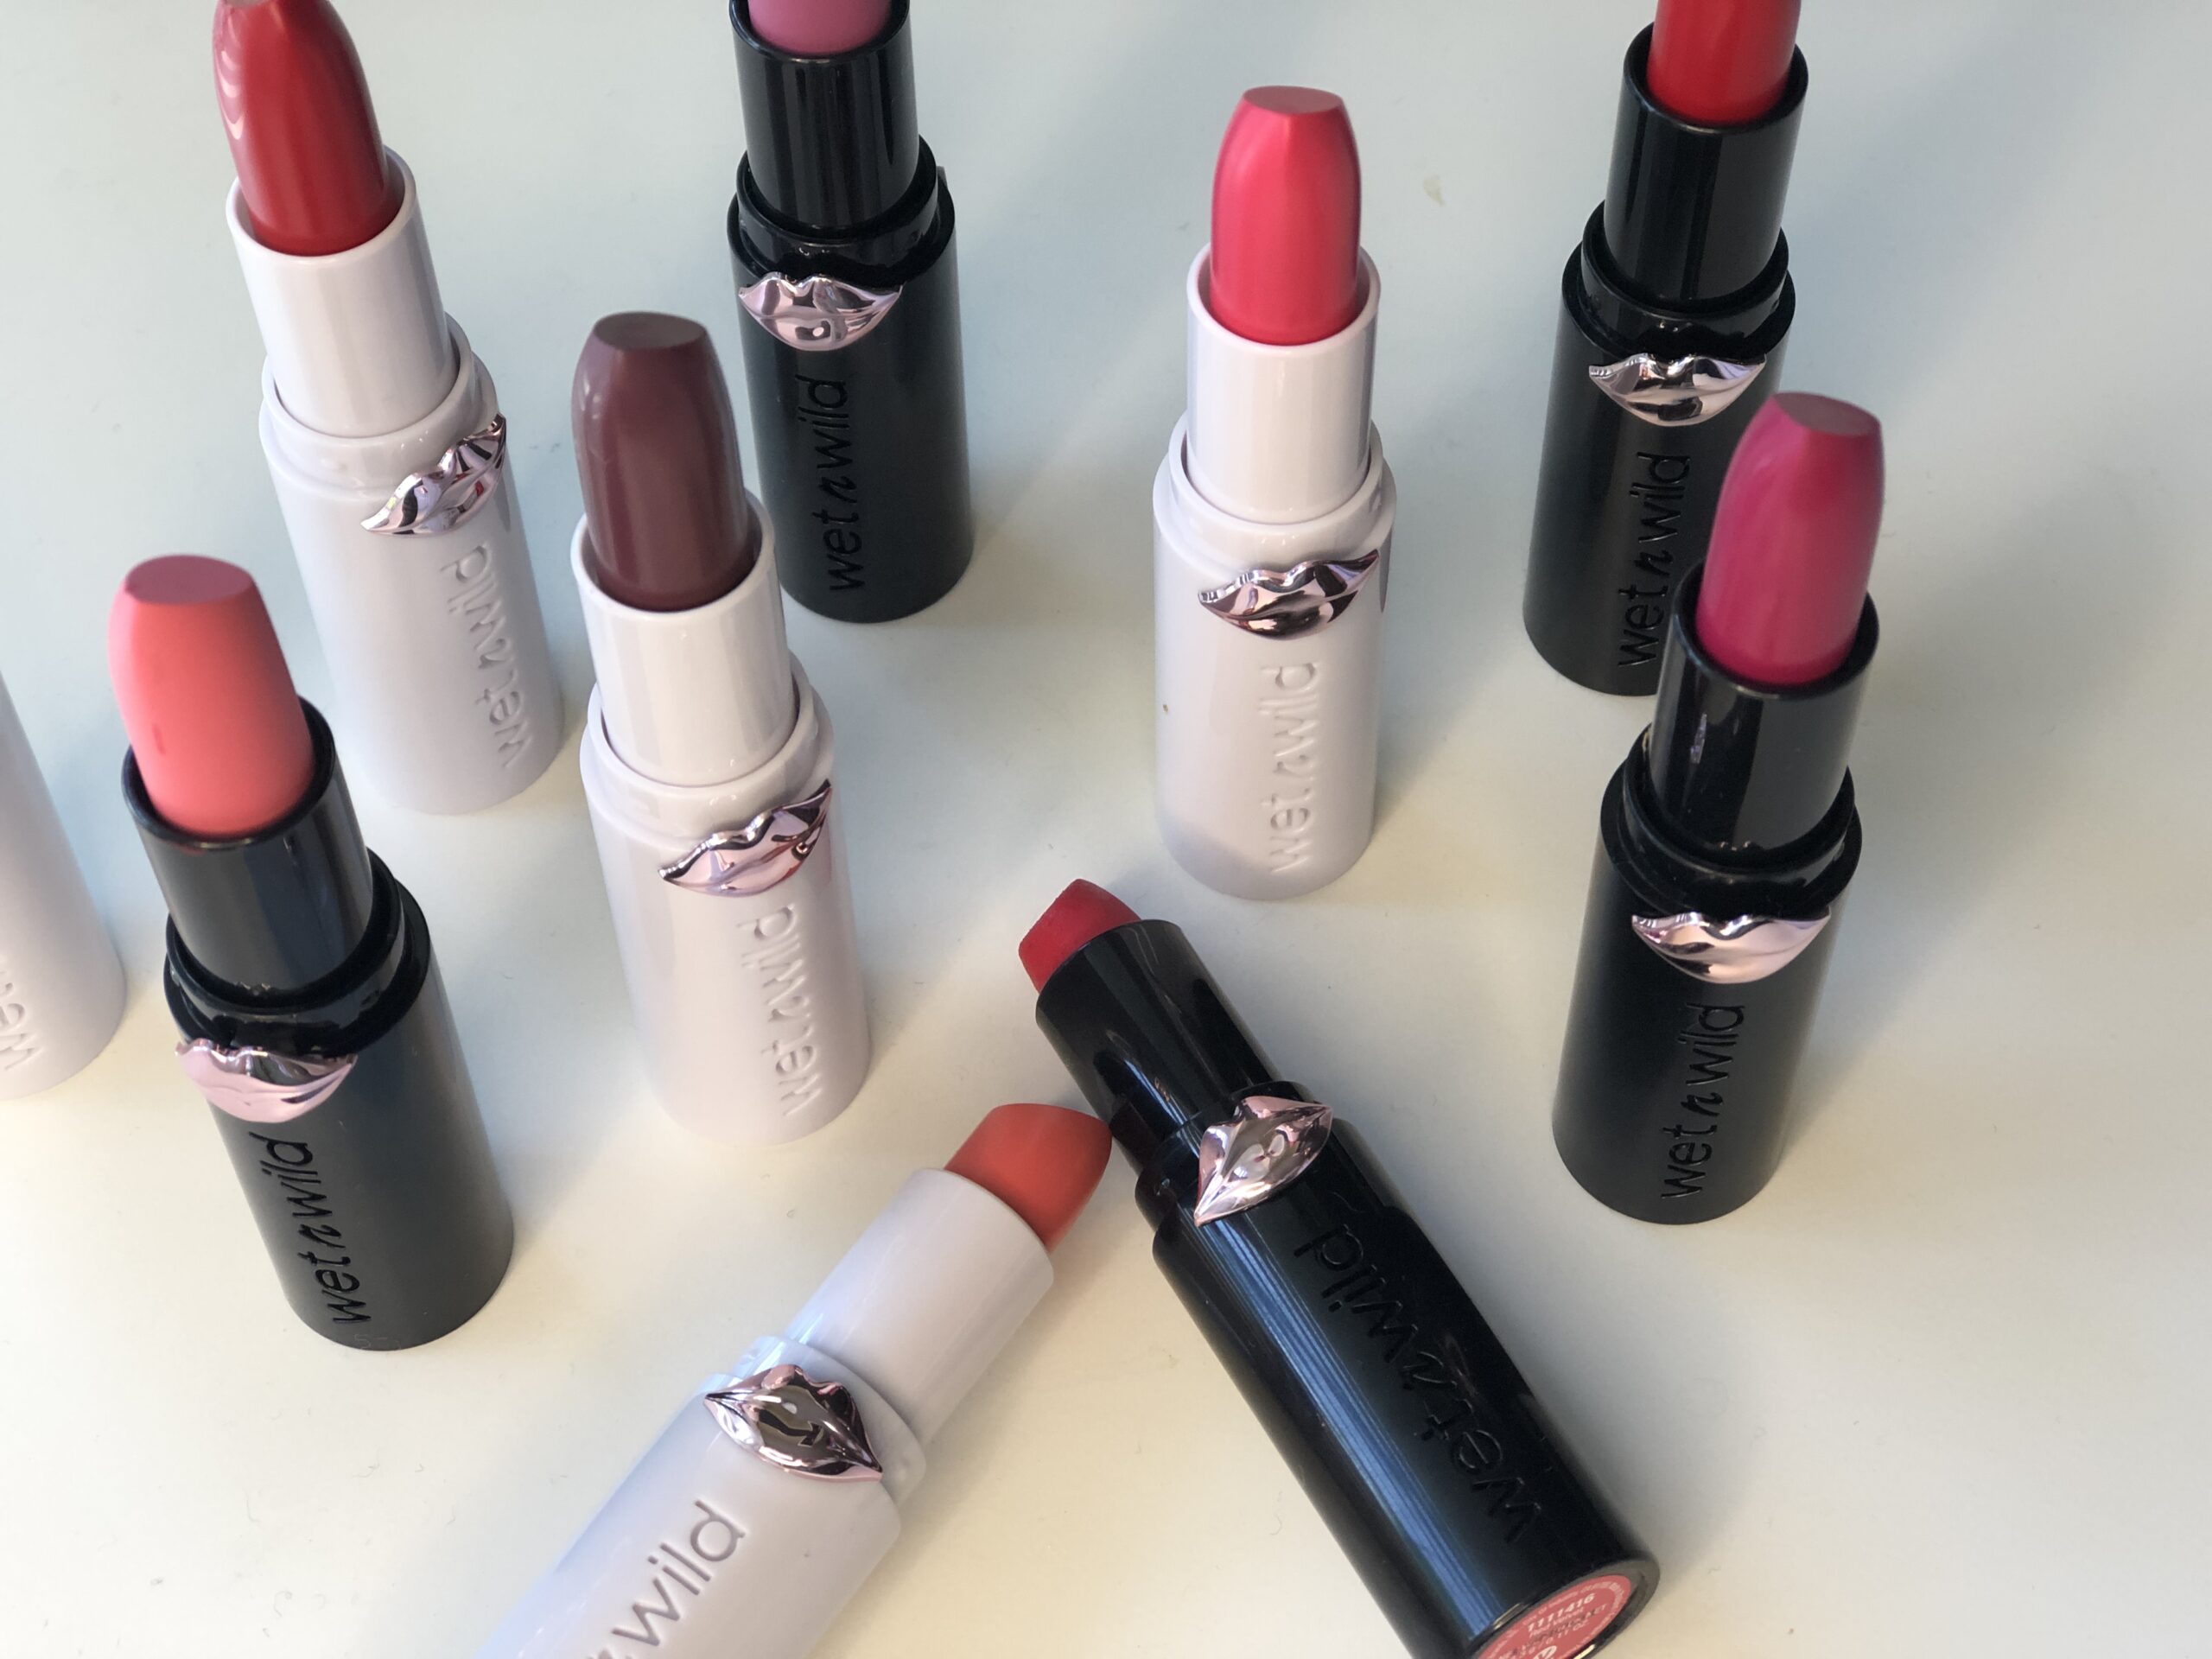 A collection of Wet 'n Wild Mega Last Lip Colors displayed on a pristine white surface.